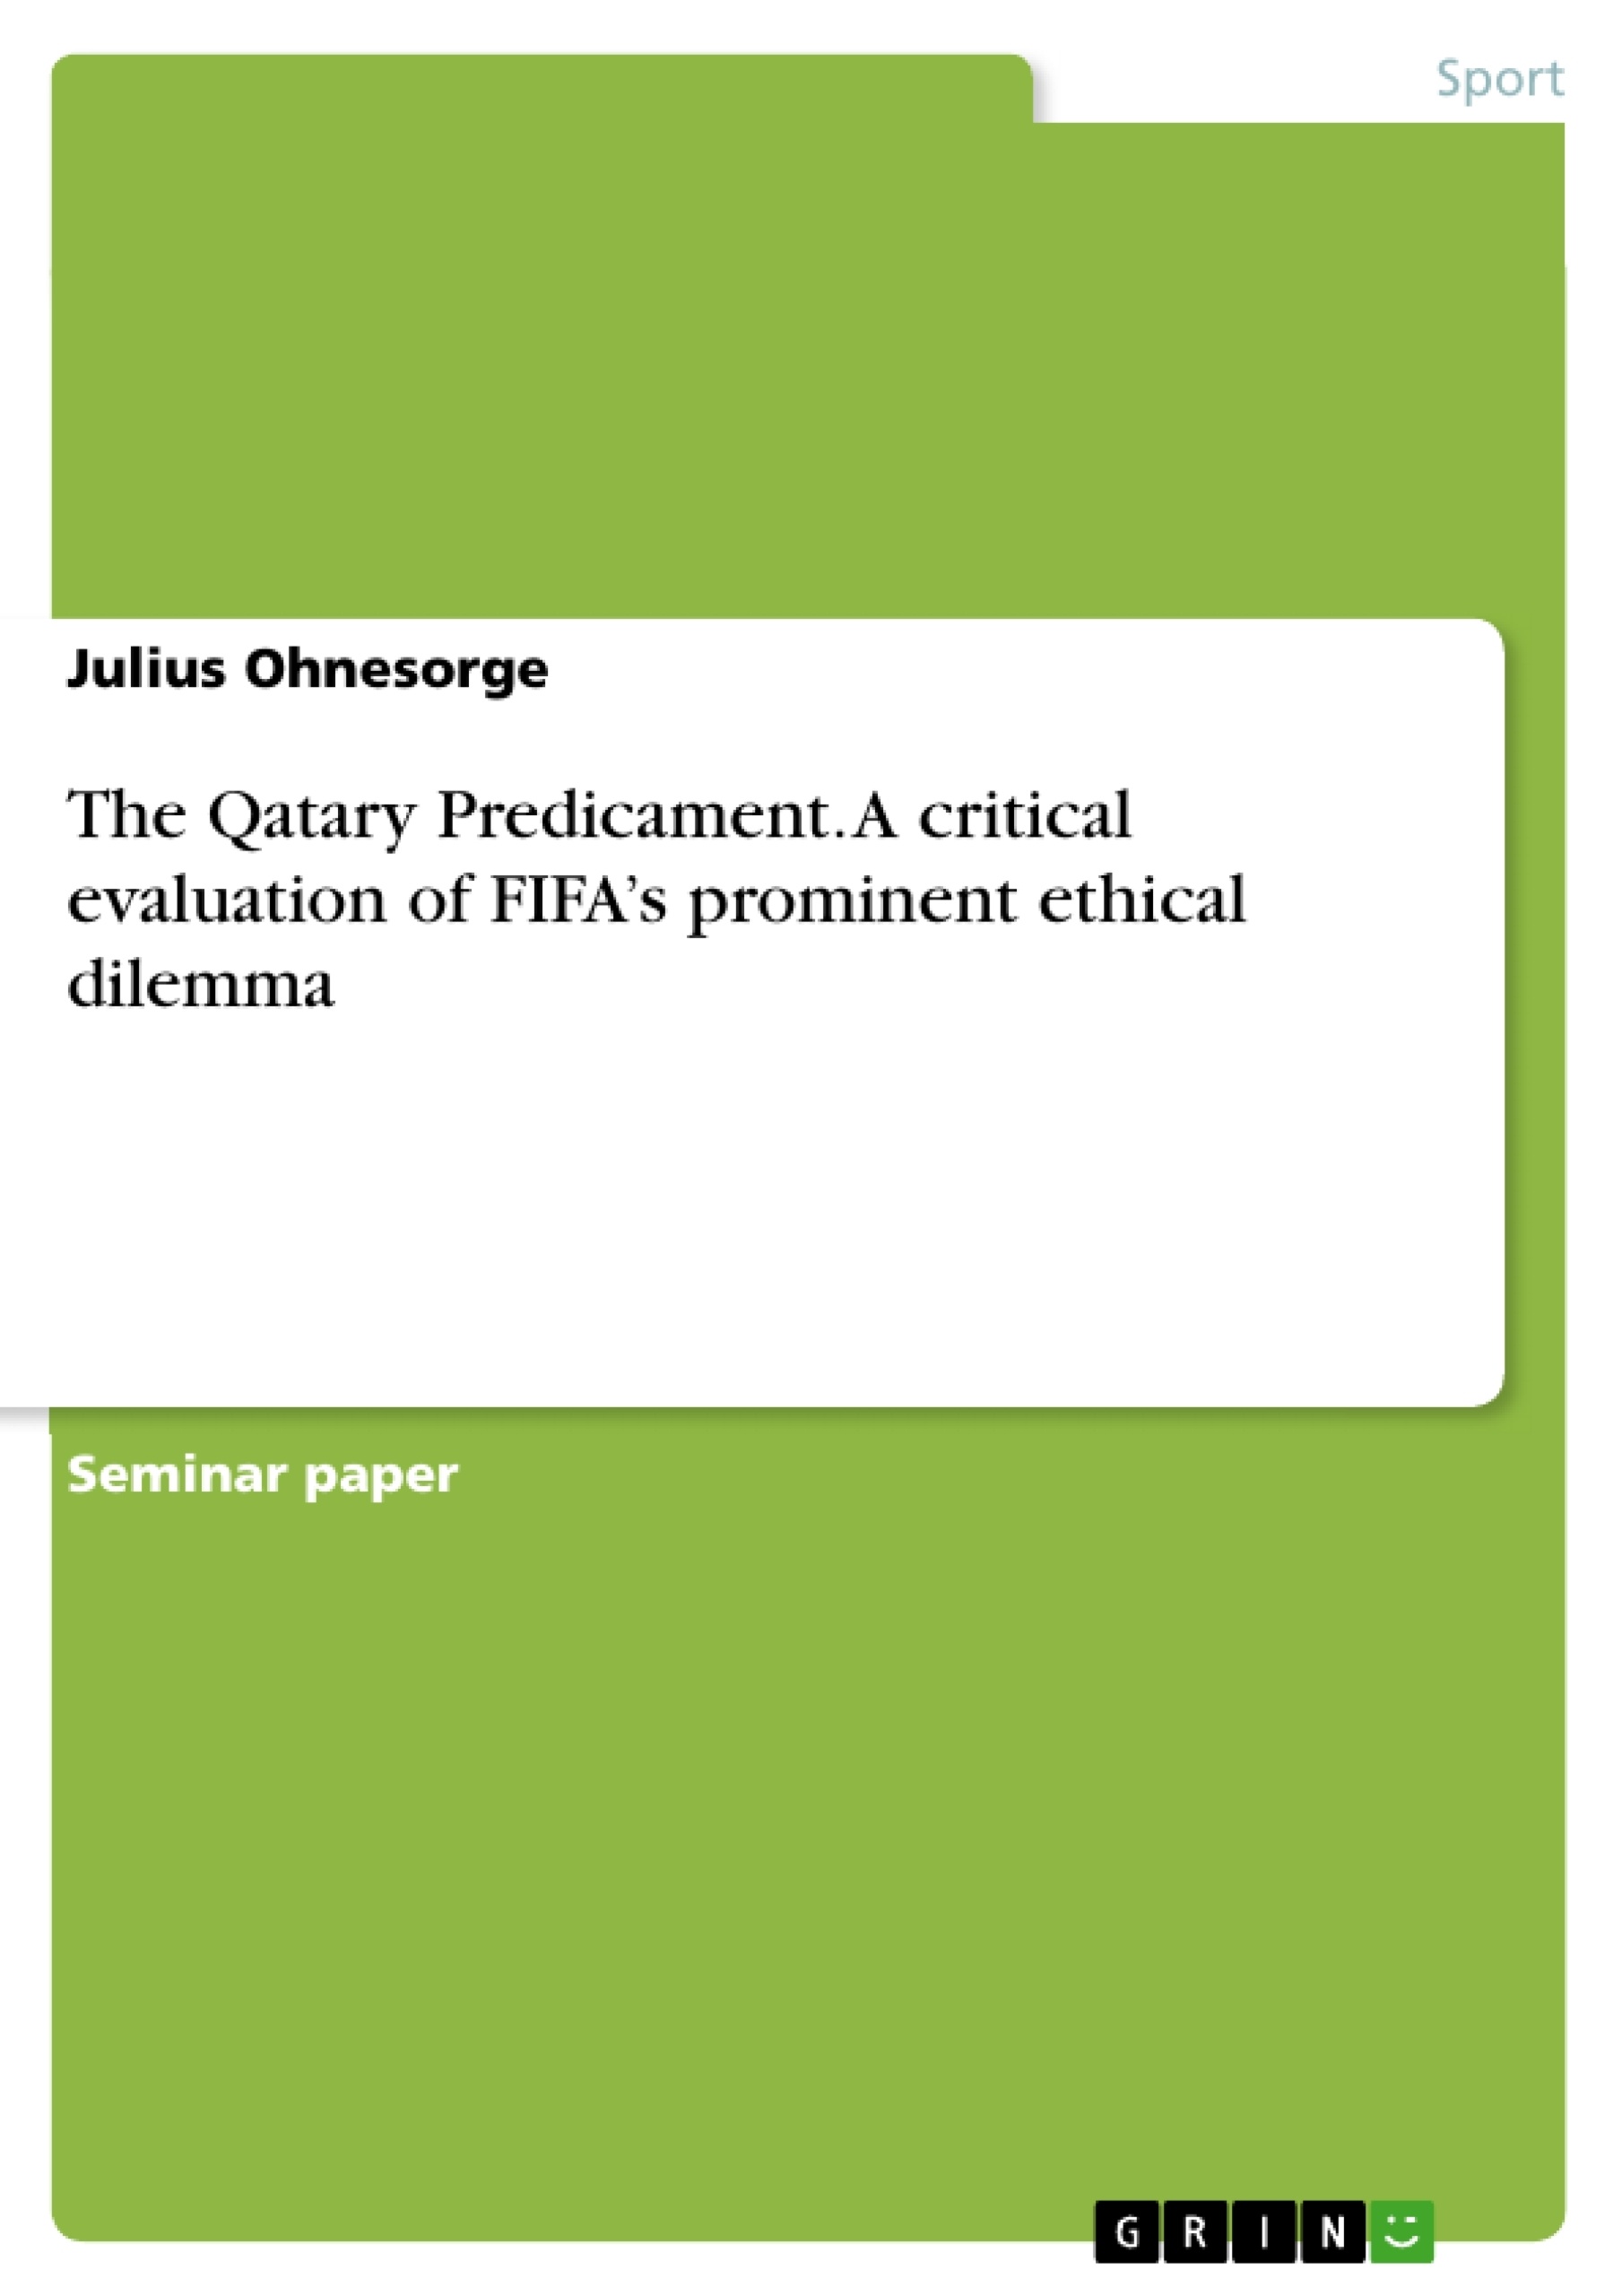 Titre: The Qatary Predicament. A critical evaluation of FIFA’s prominent ethical dilemma